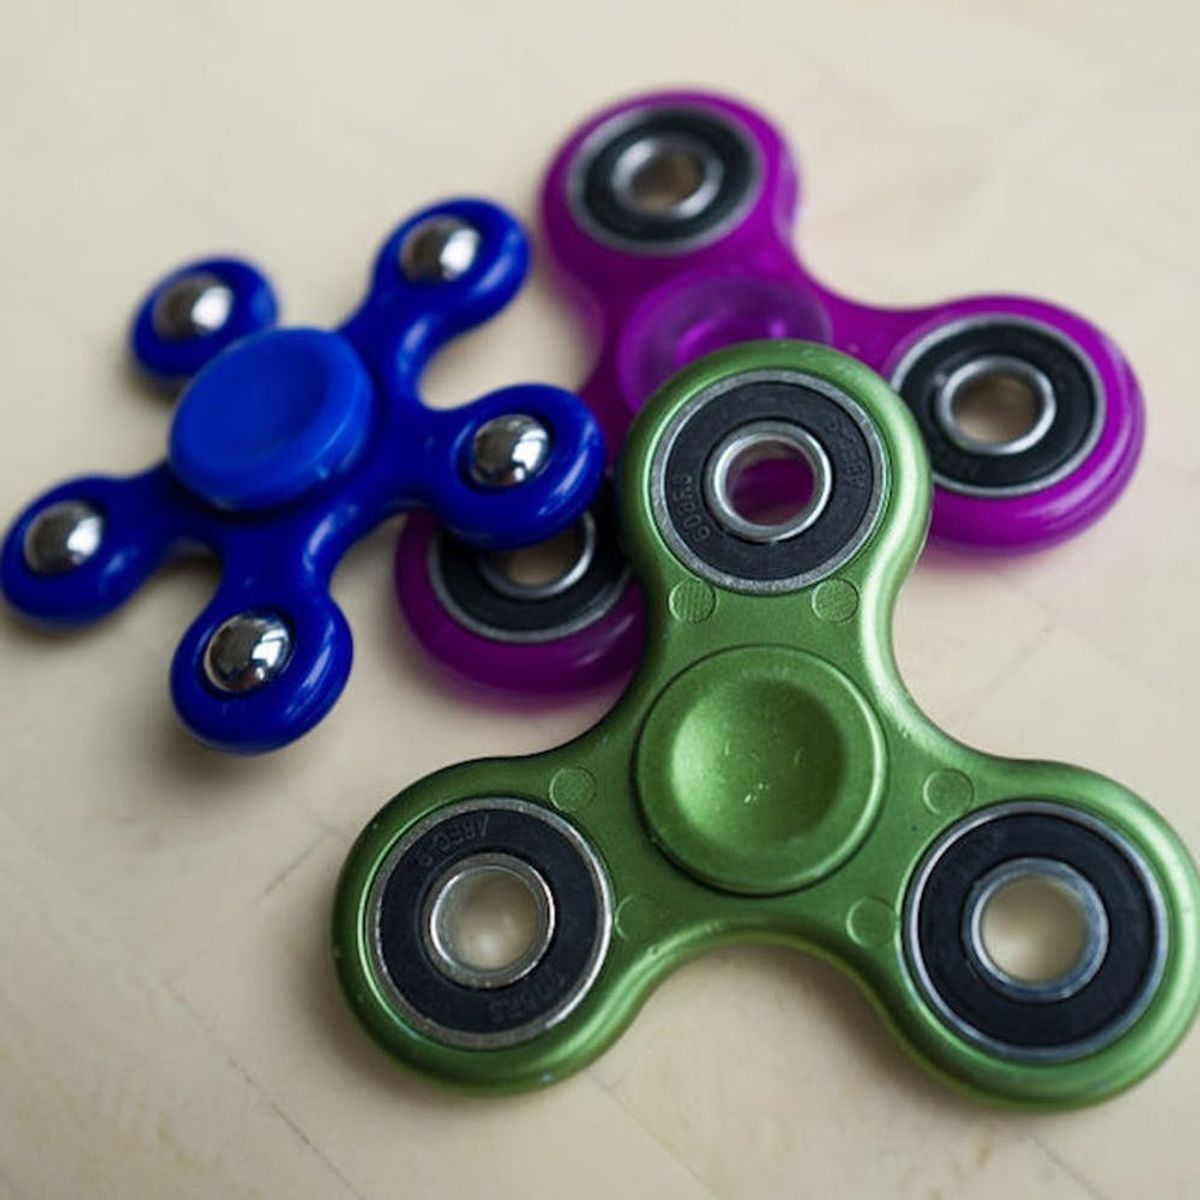 This Might Be the Troubling Cause of the Fidget Spinner Trend